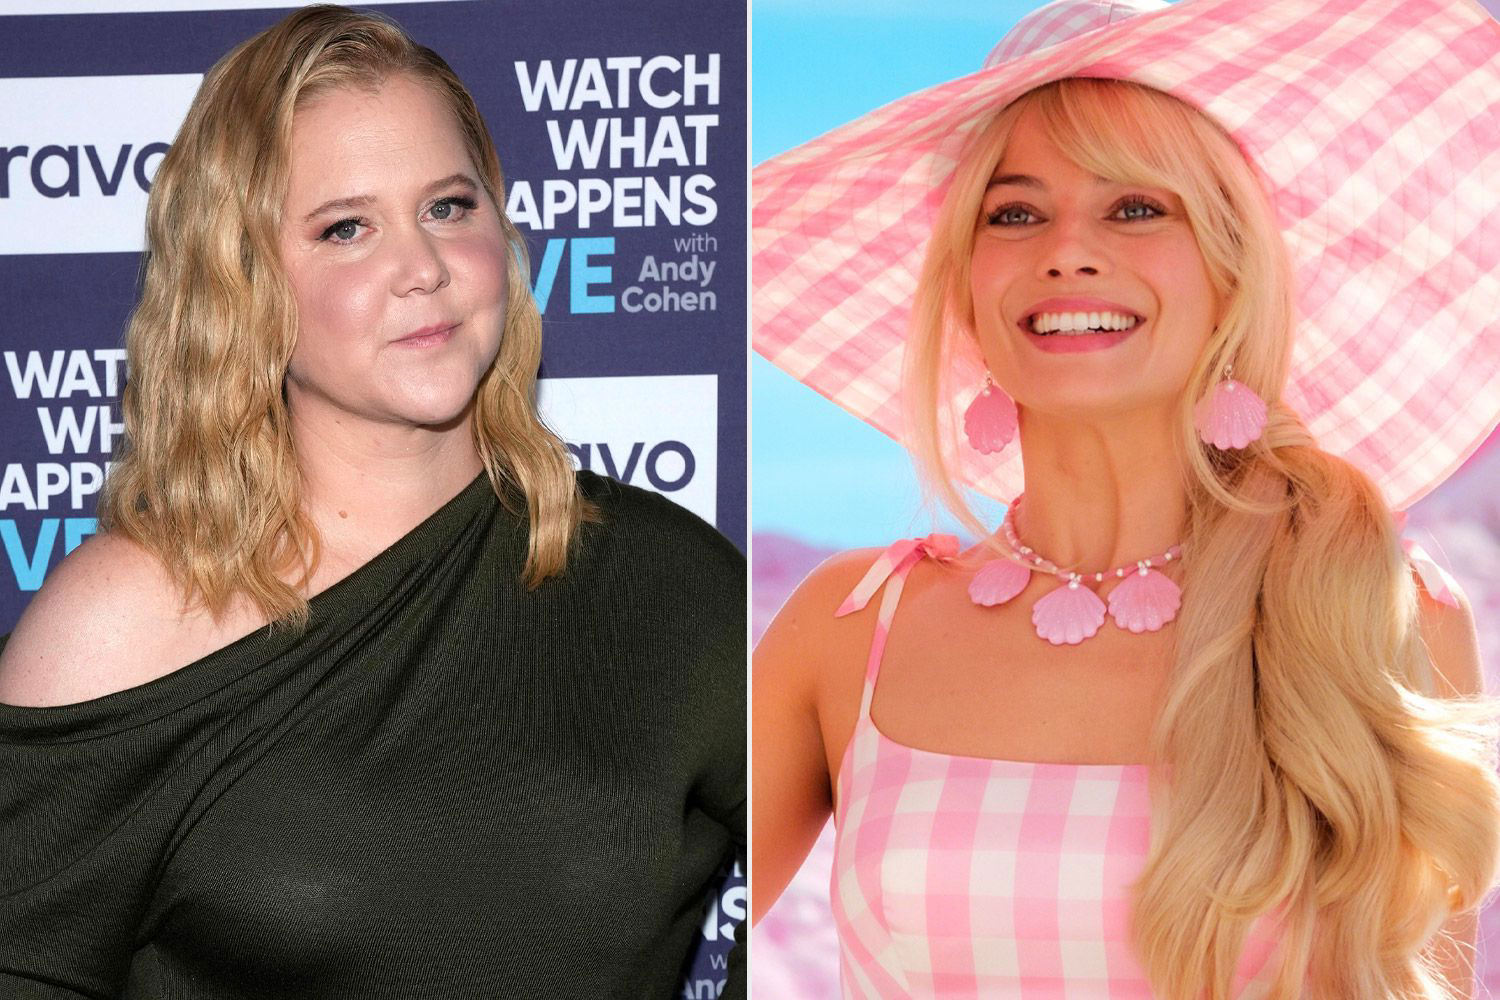 Amy Schumer Reacts To Barbie Years After Dropping Out Of Original Project